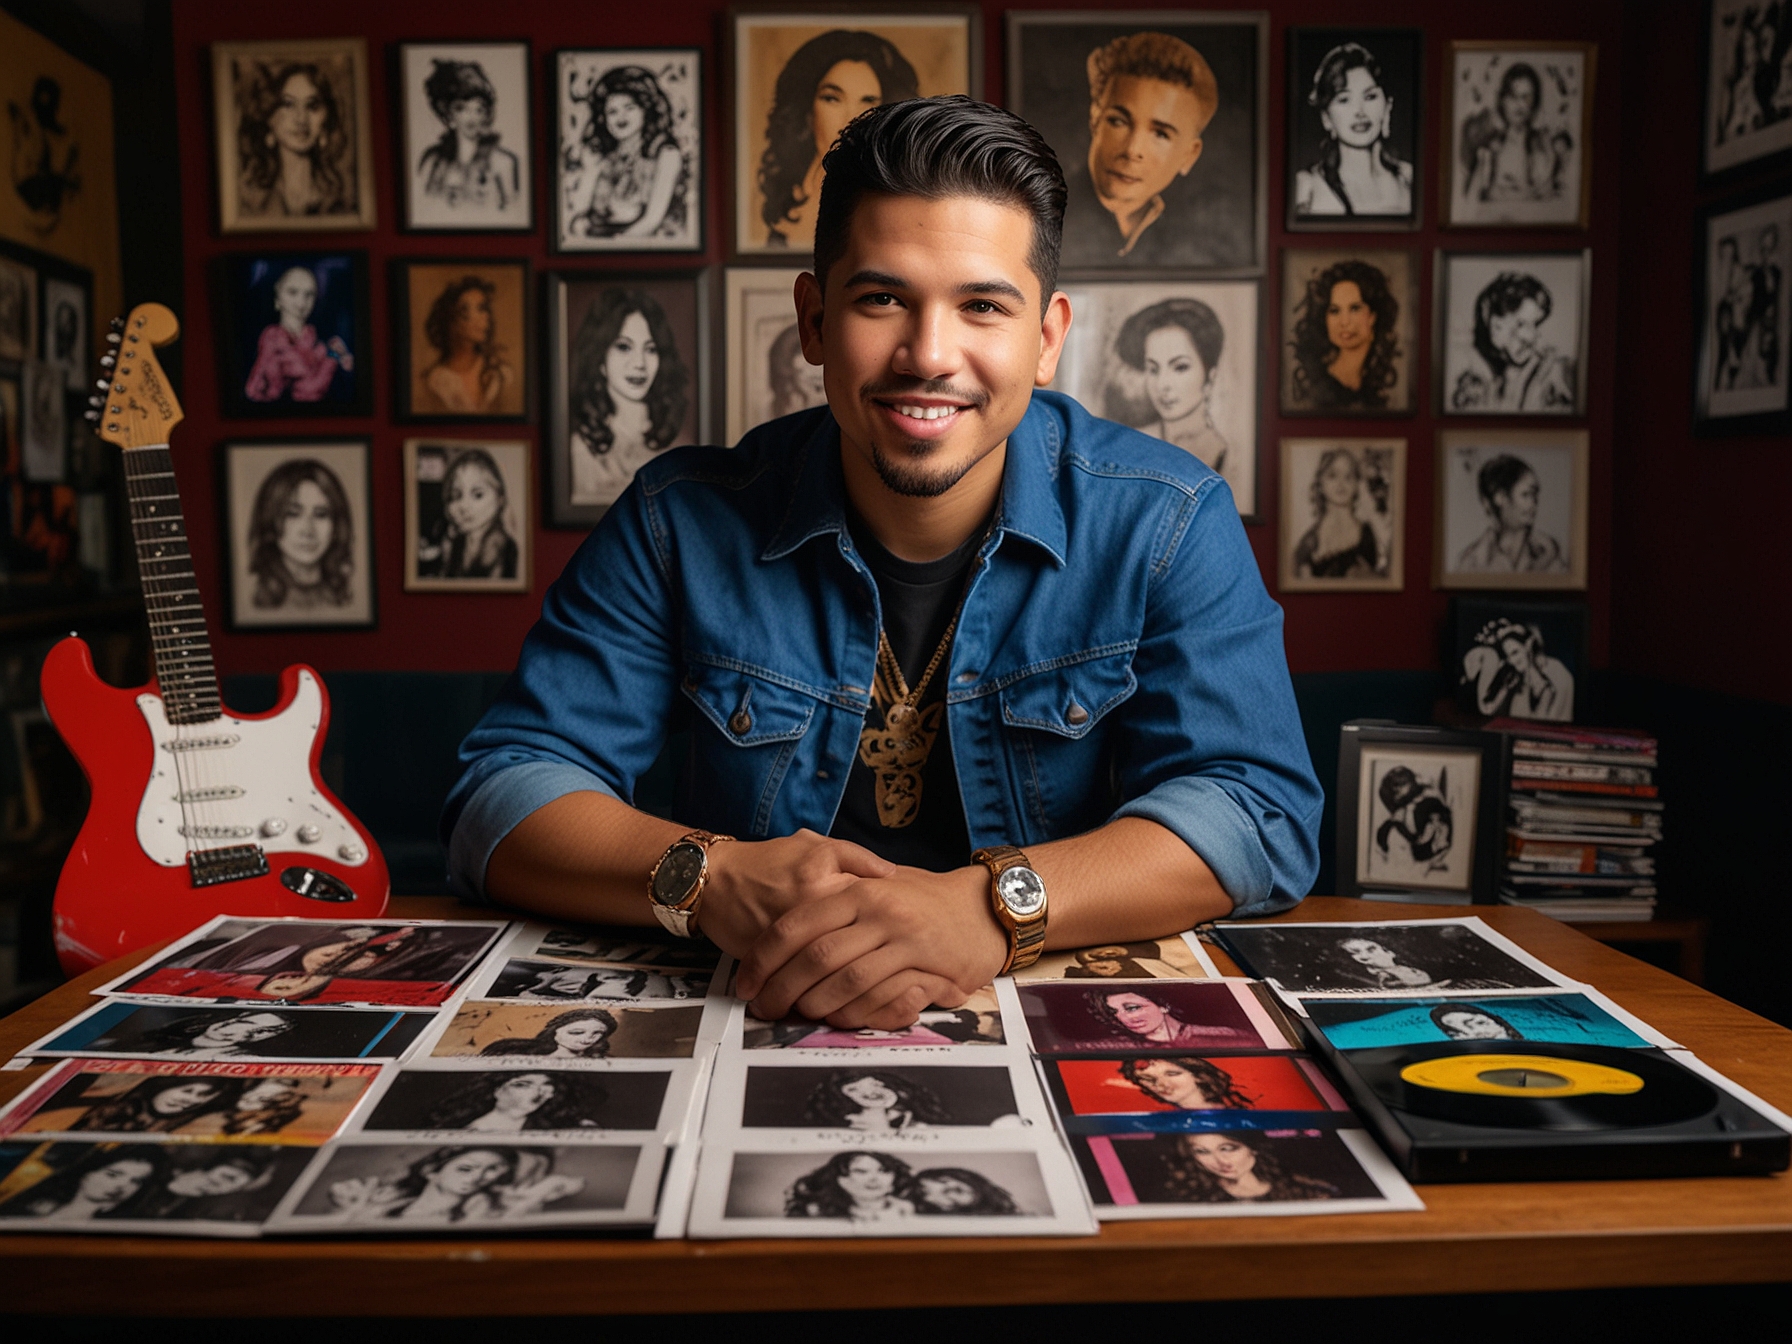 Andrew Longoria poses with some of his most prized Selena Quintanilla memorabilia, including rare stage costumes and vinyl records that highlight her iconic career and cultural impact.